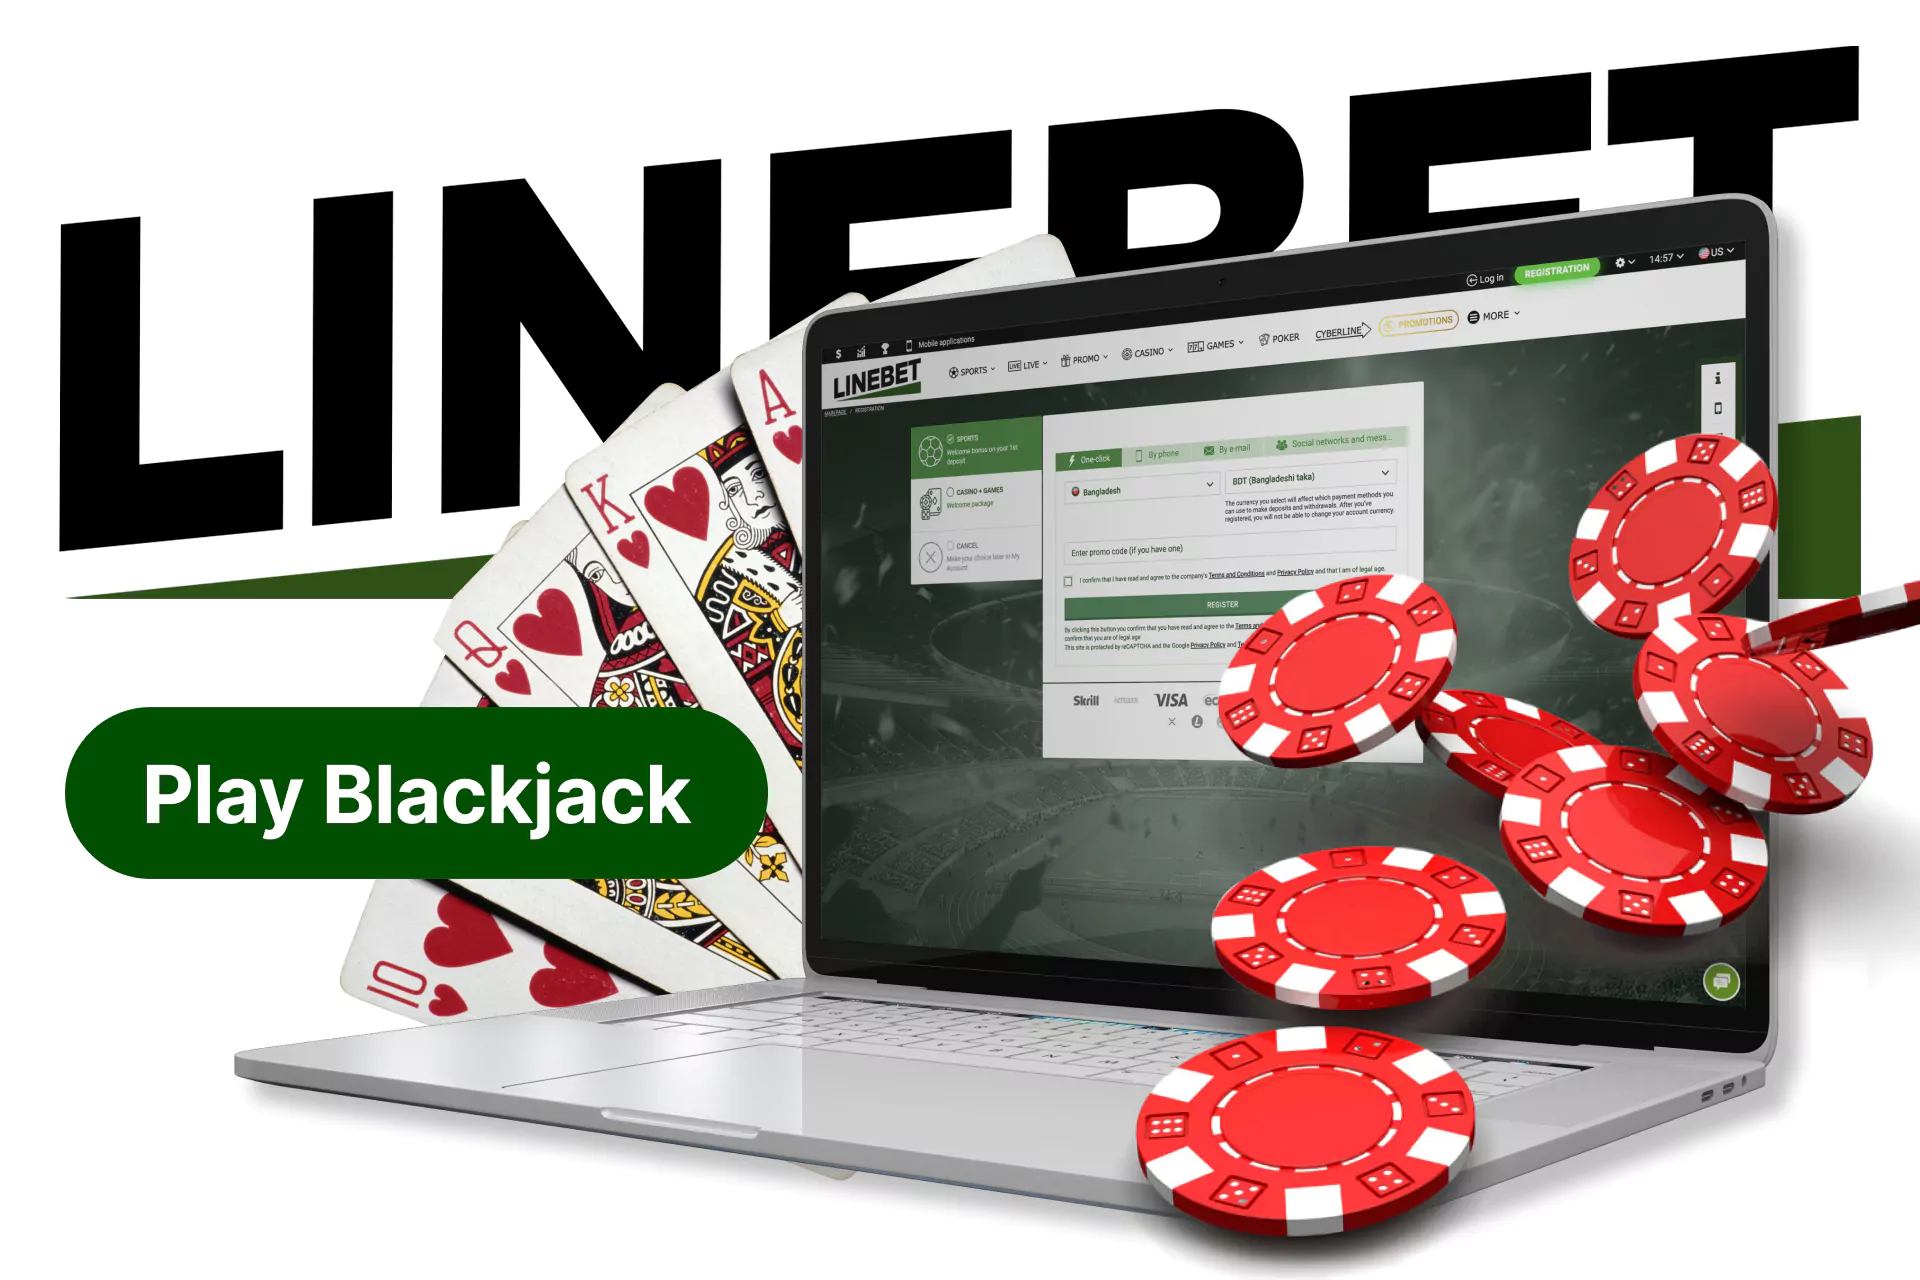 With this guide, learn how to easily and simply start playing blackjack on Linebet.